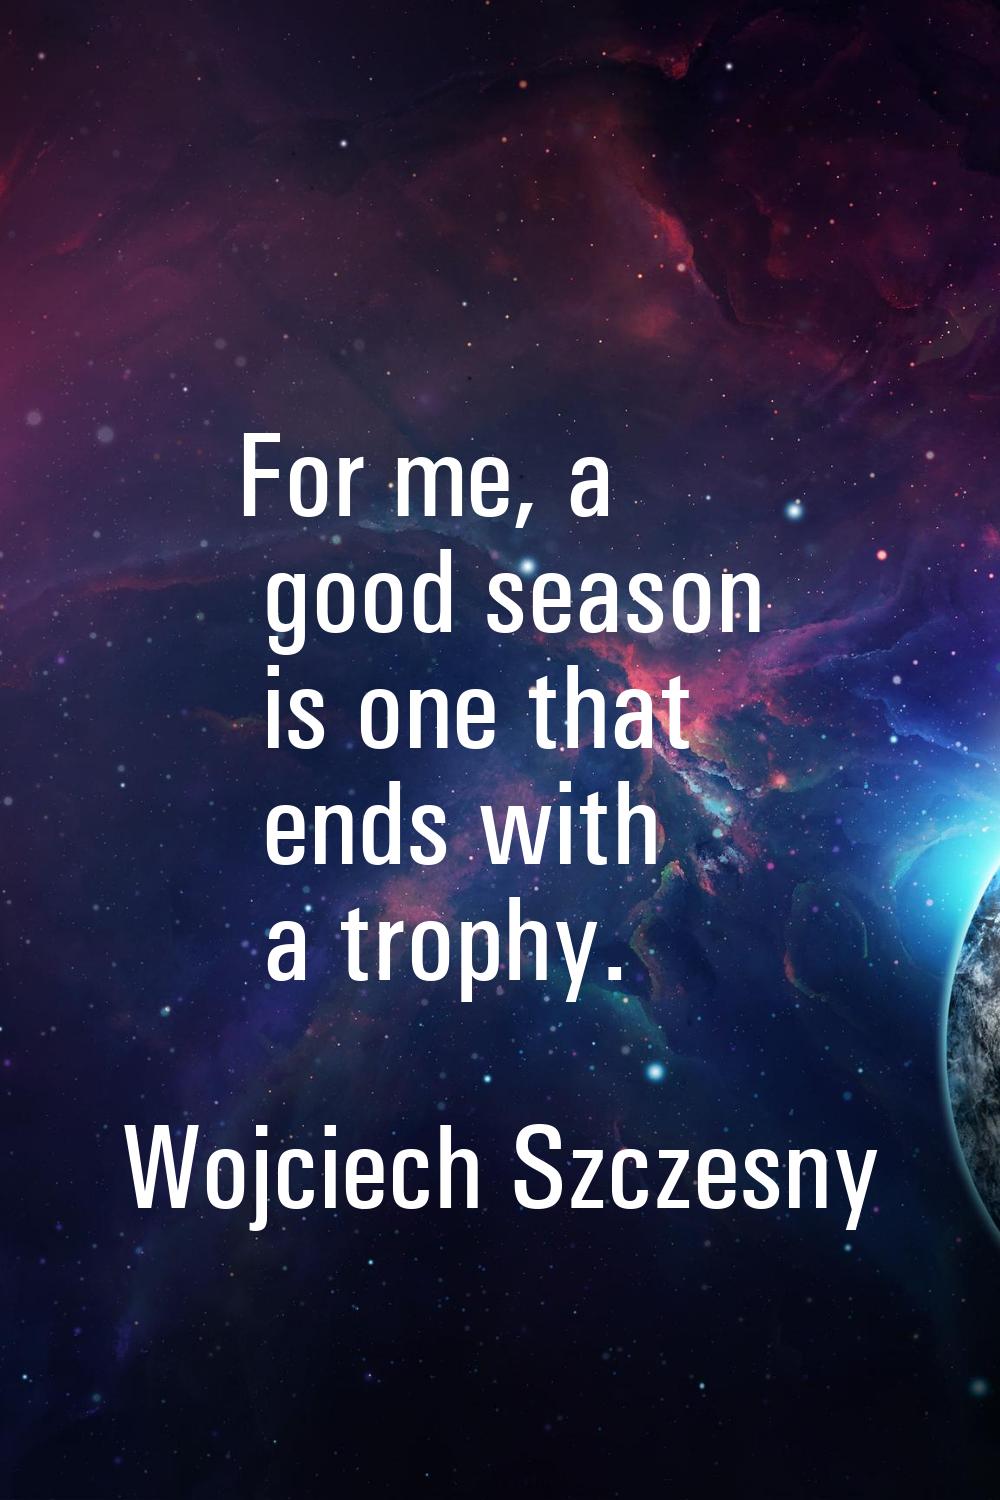 For me, a good season is one that ends with a trophy.